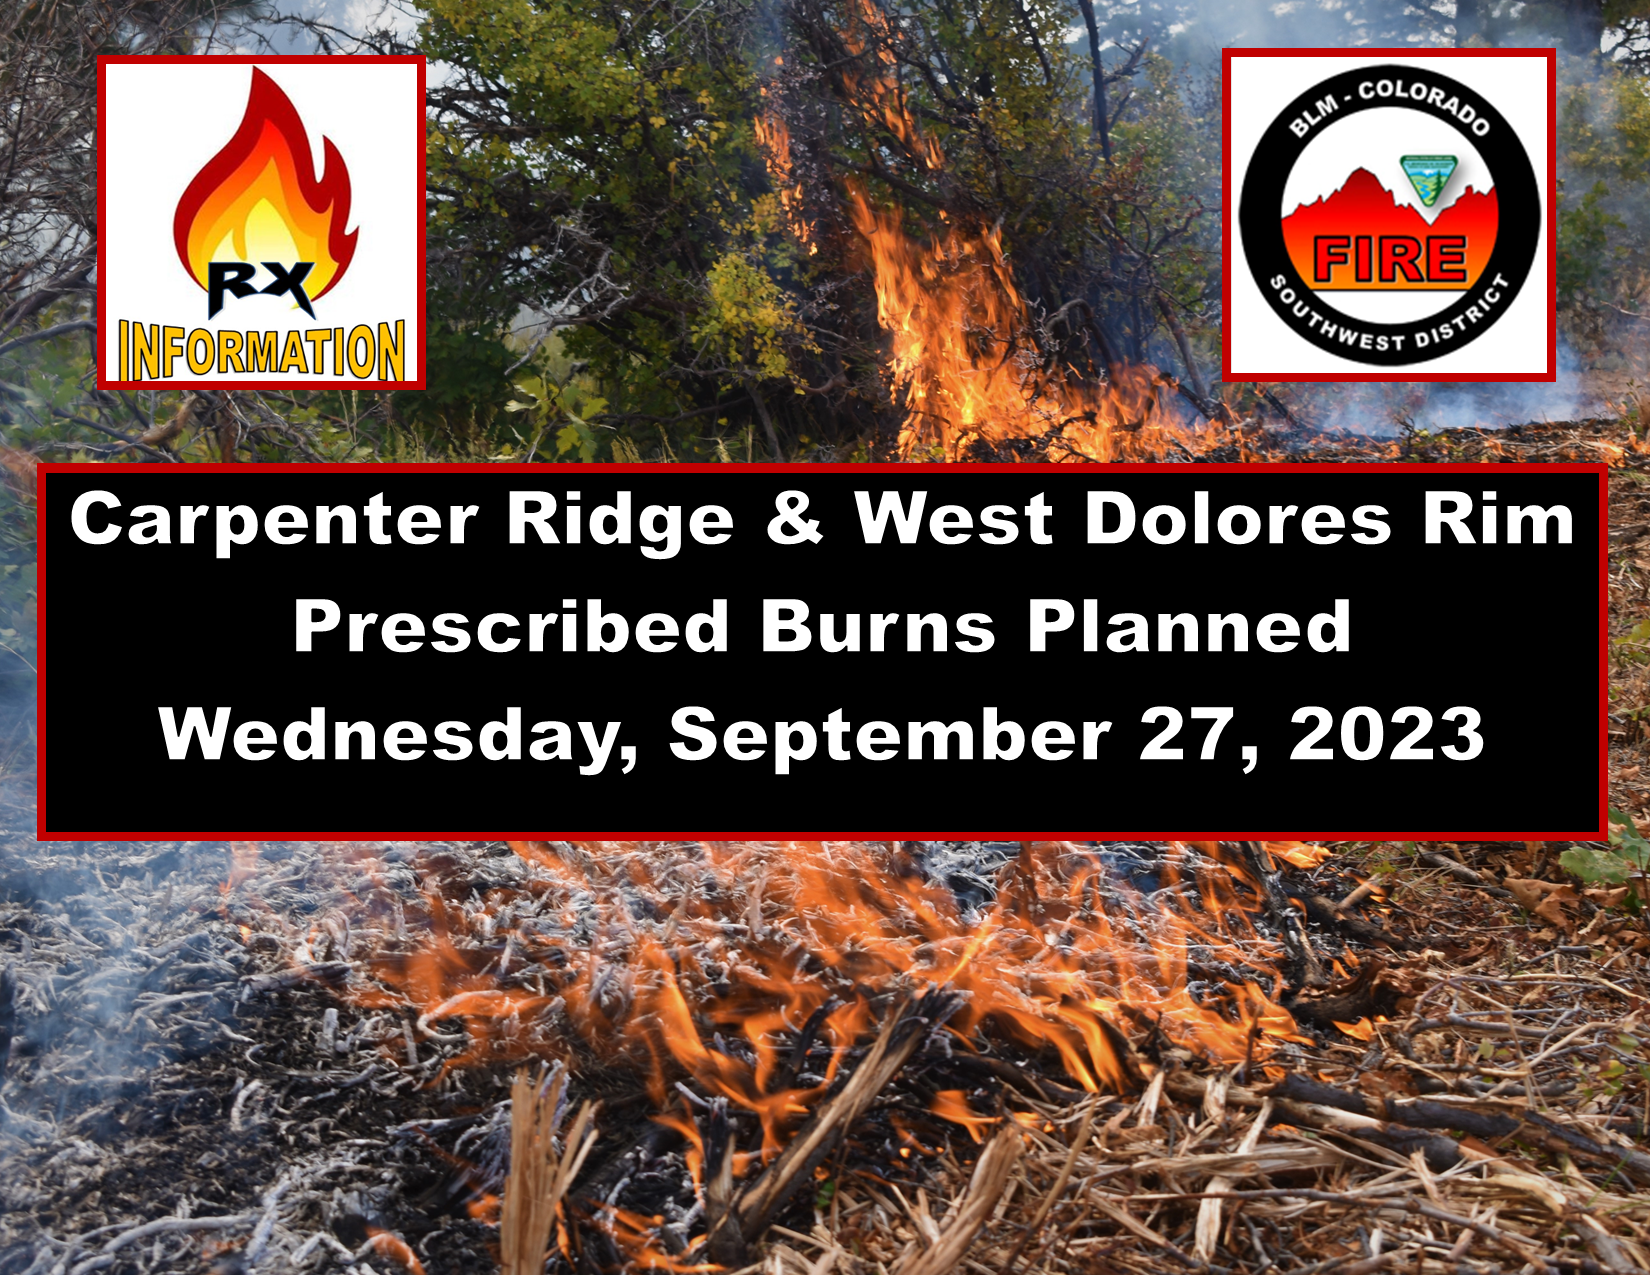 Image of smoke and flames burning vegetation on the ground and oak brush. Text RX Information BLM Colorado Southwest District Fire, Carpenter Ridge & West Dolores Rim Prescribed Burns Planned Wednesday, September 27, 2023. 